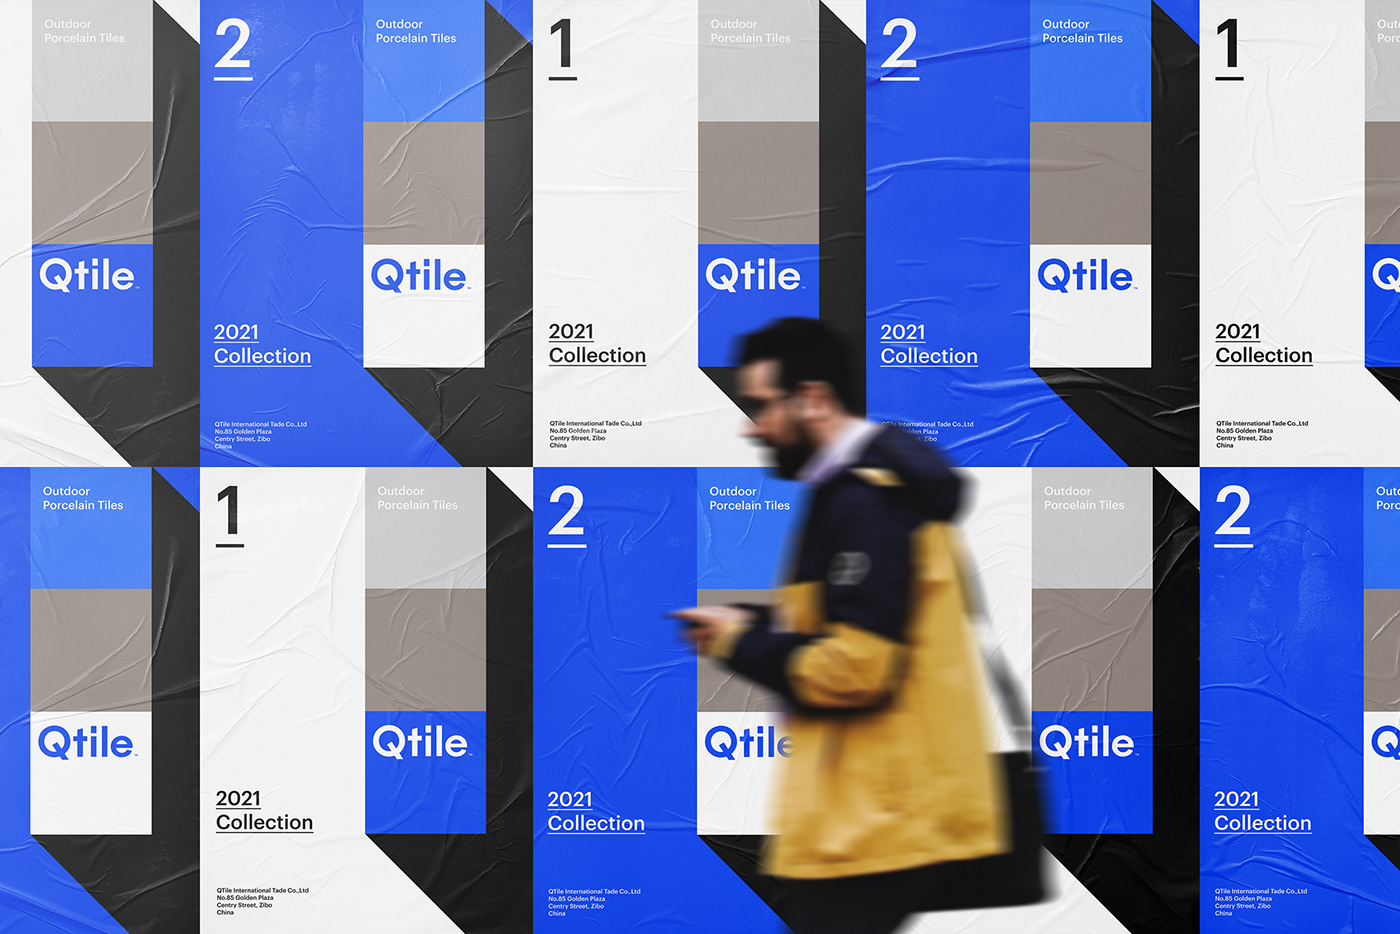 Wall poster design for Qtile brand.
